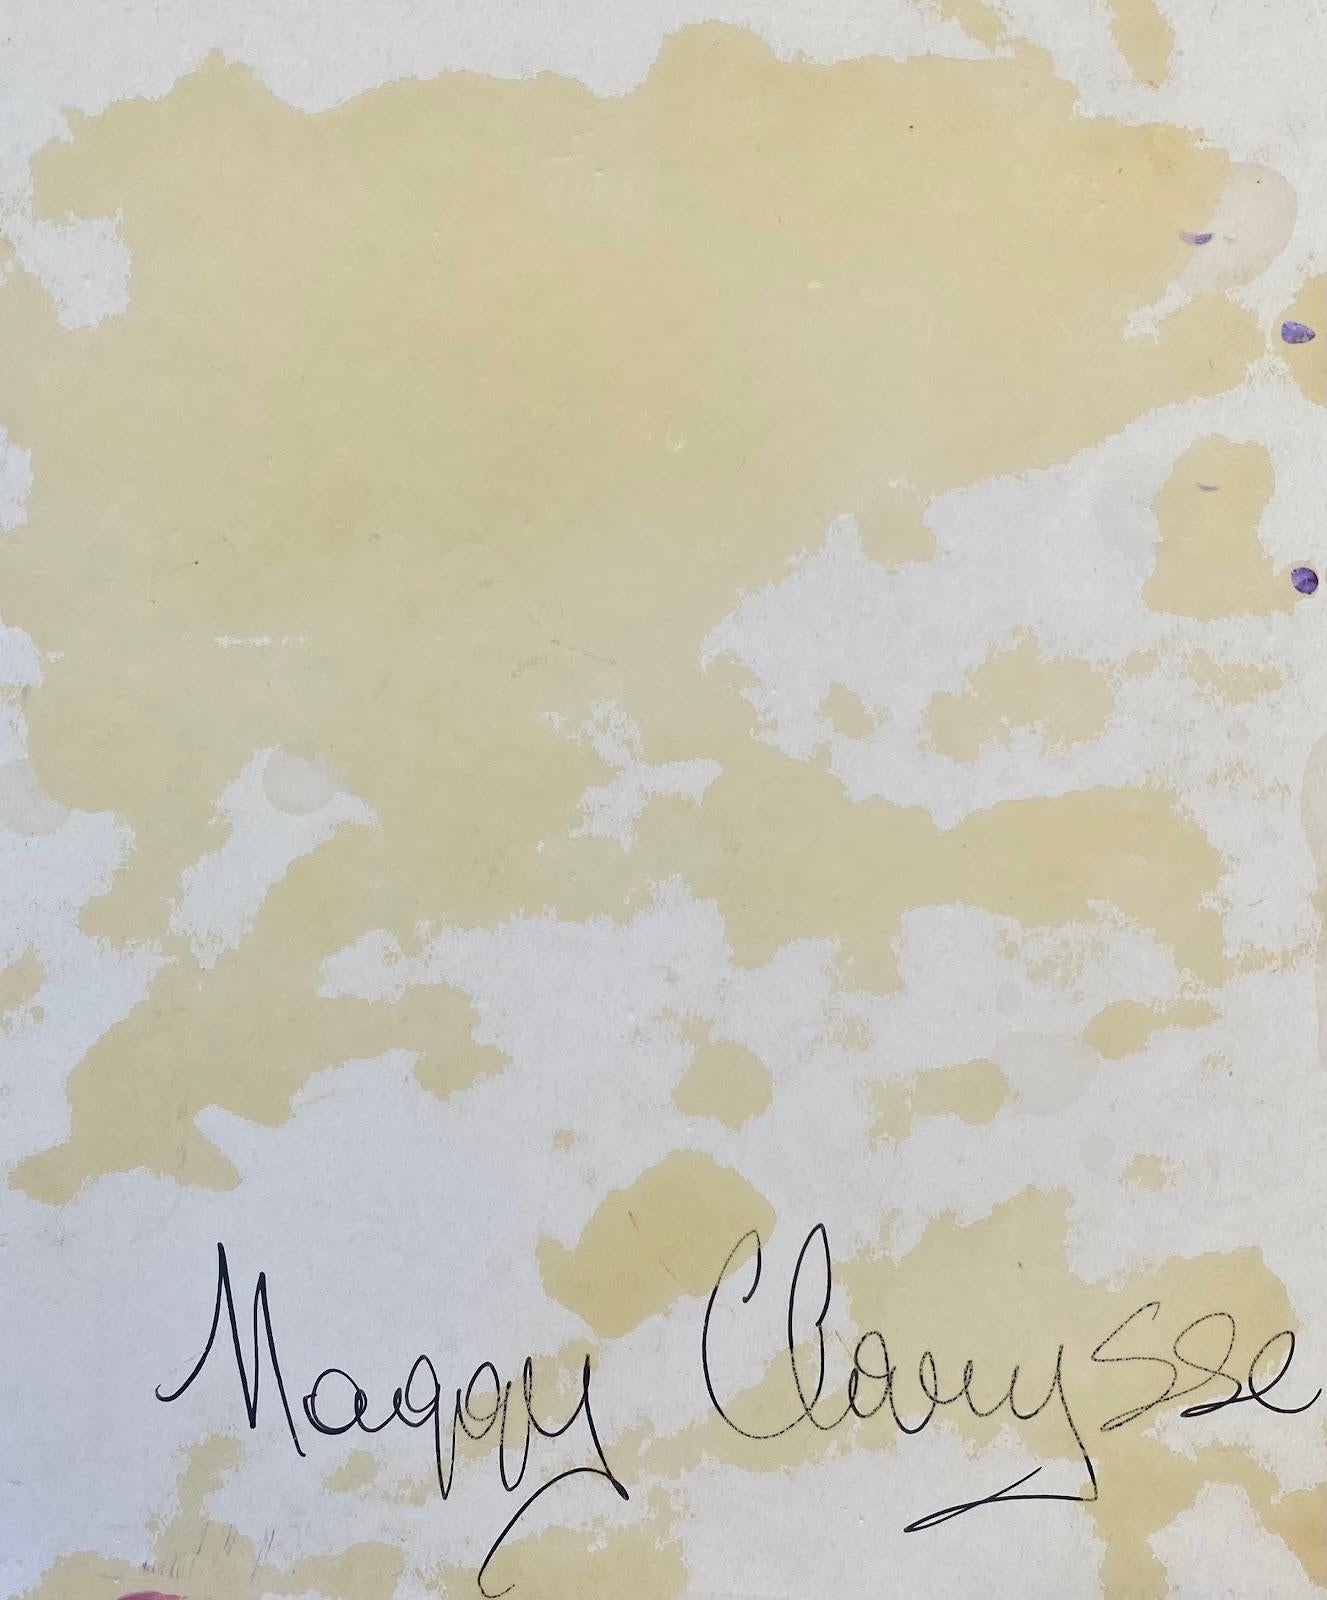 Maggy Clarysse (1931-2011)
Oil on thick card, unframed, 
 6.5 x 5.5 inches
Signed Initials                                                                                                      
condition: excellent
provenance: all the paintings we